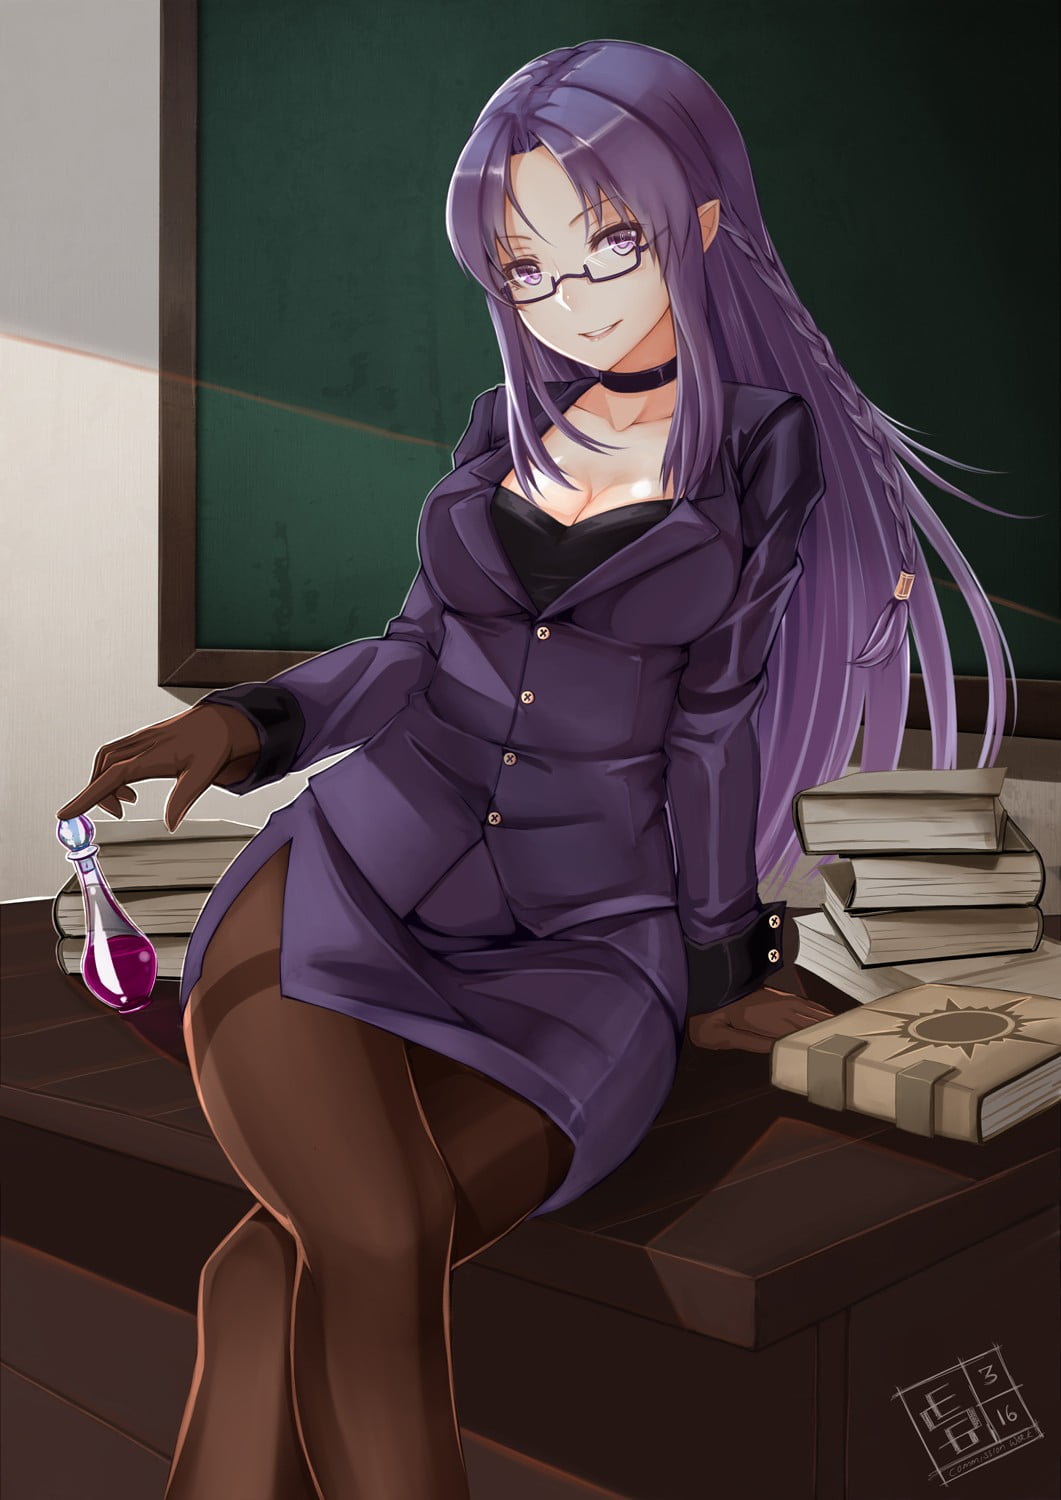 Purple Haired Female Anime Character Illustration Caster Fatestay Night Fate Series